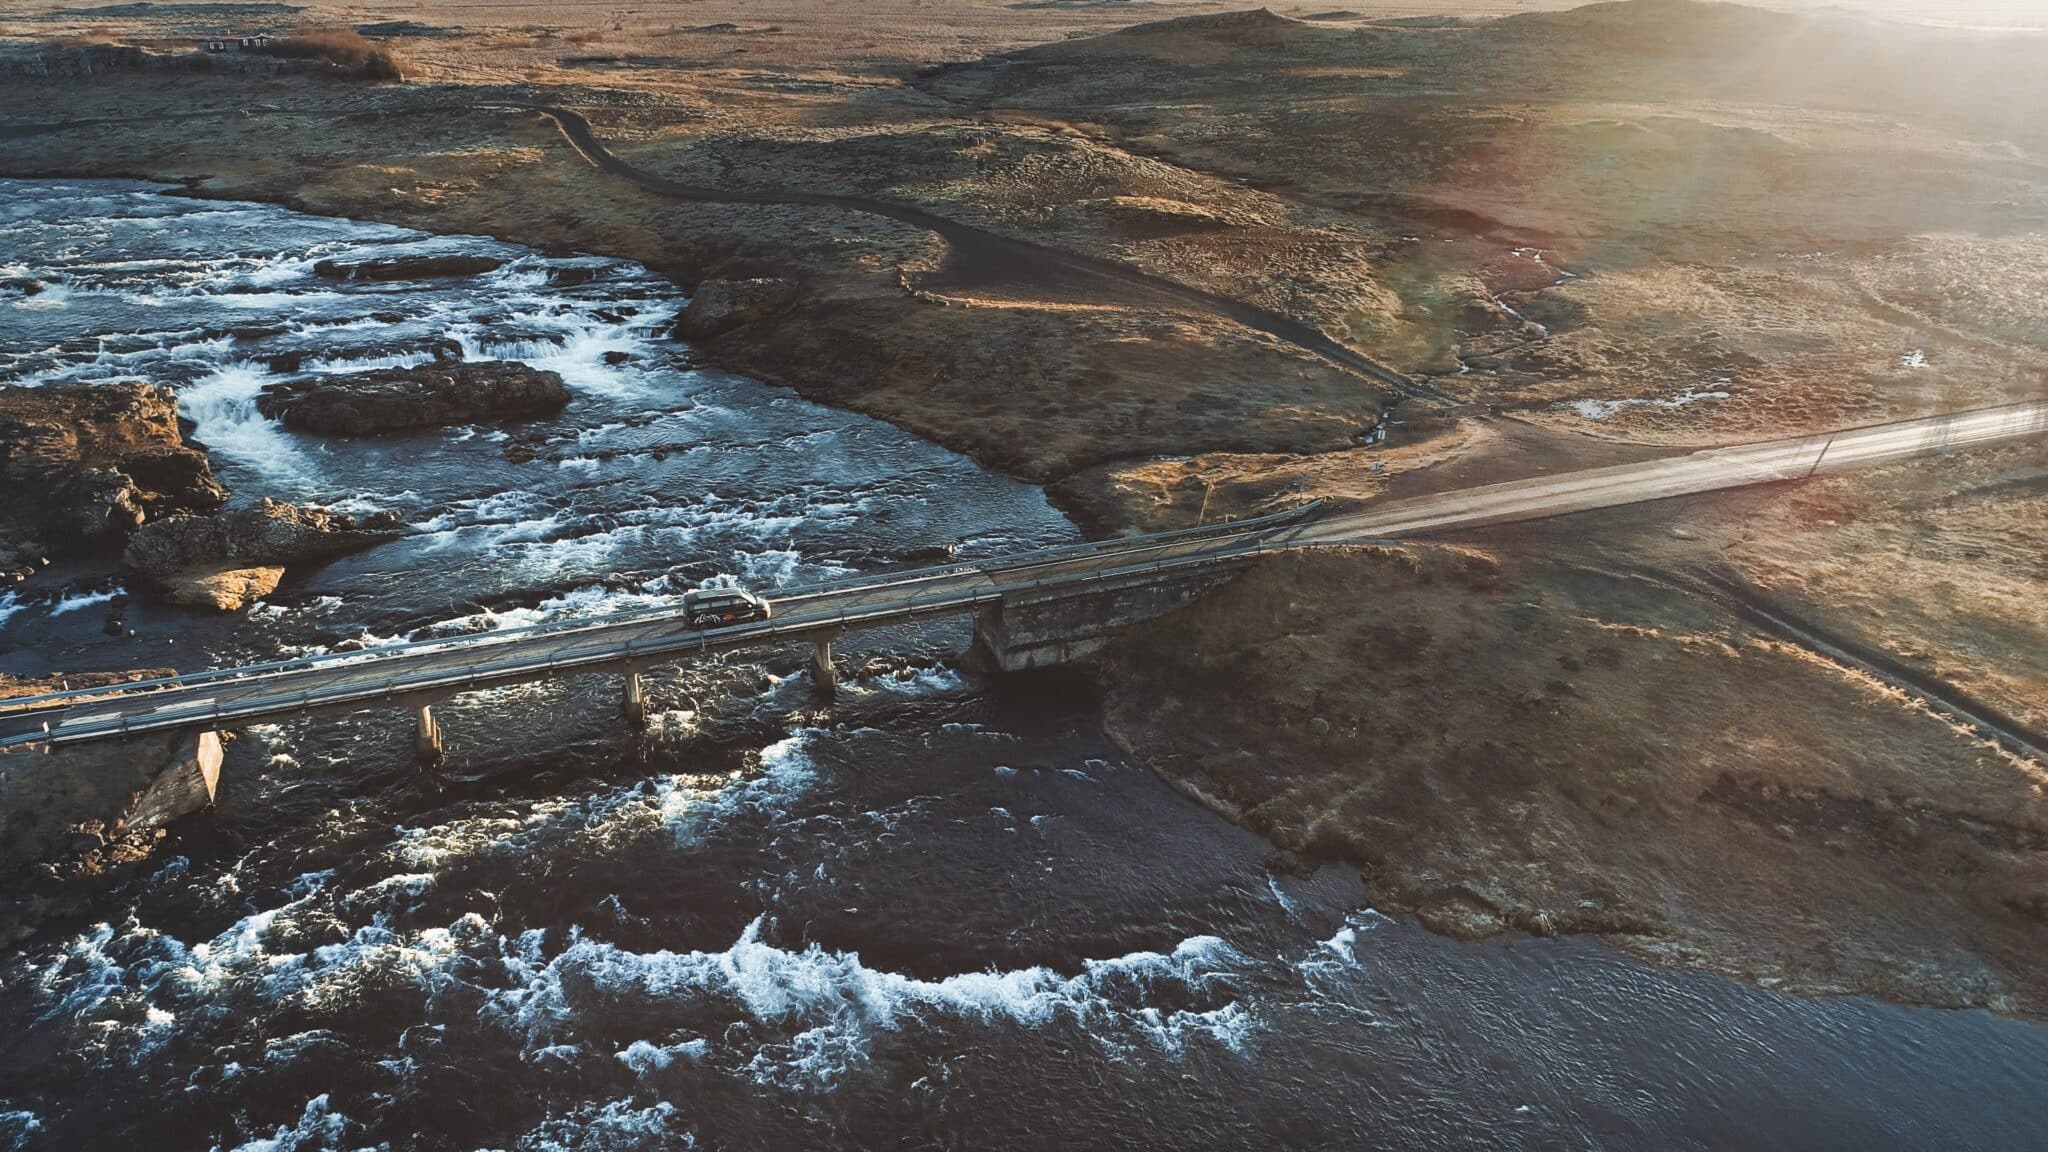 A Couple driving around exploring the coast of Iceland